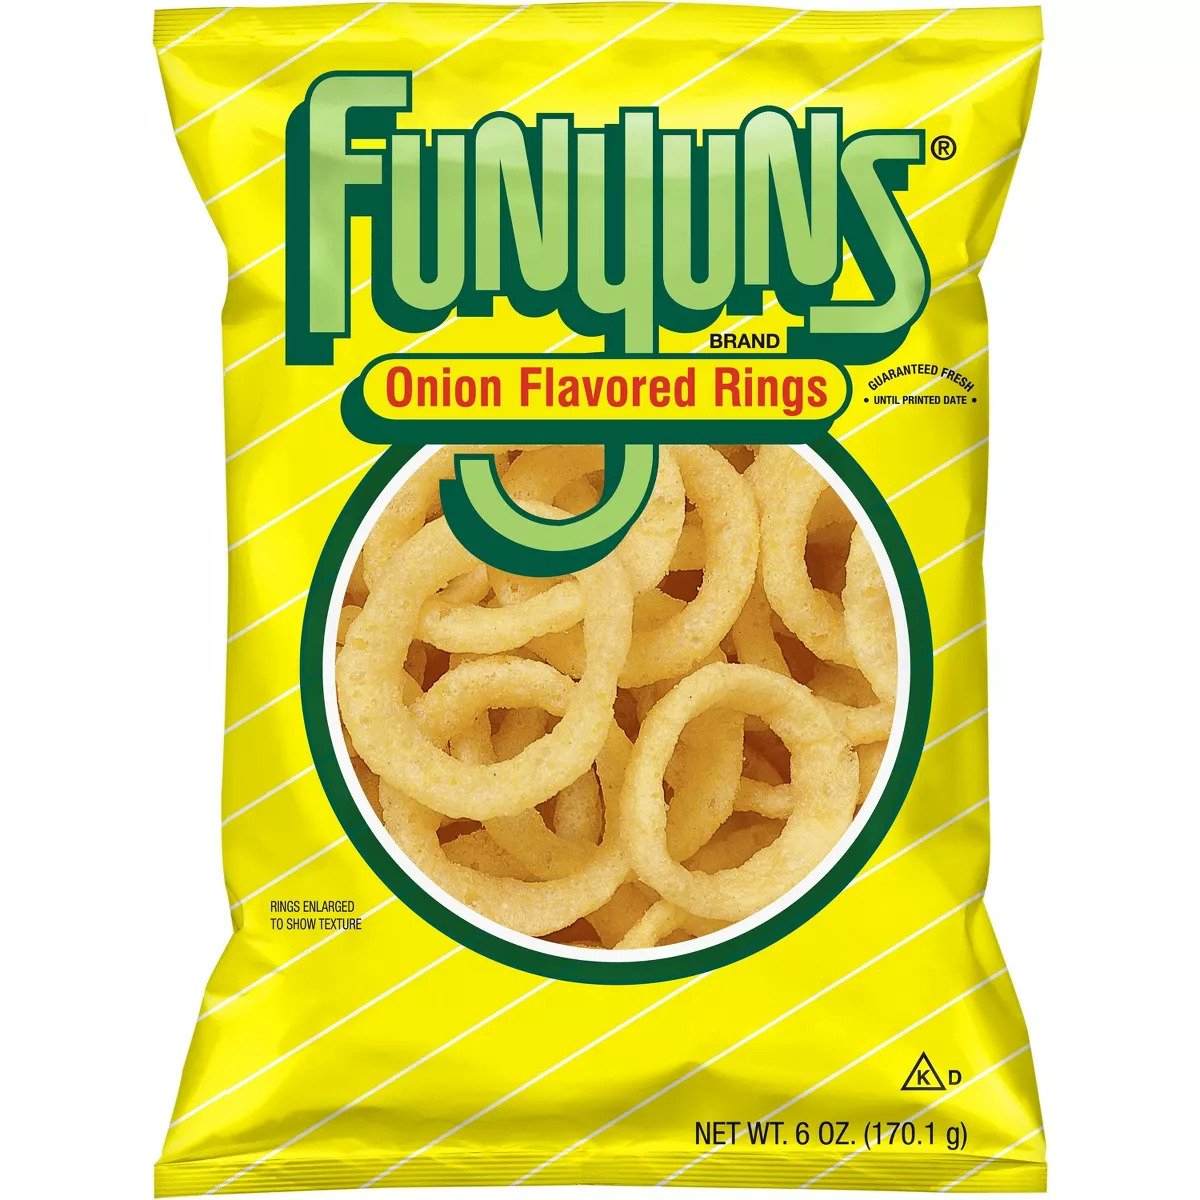 Funyuns Package.